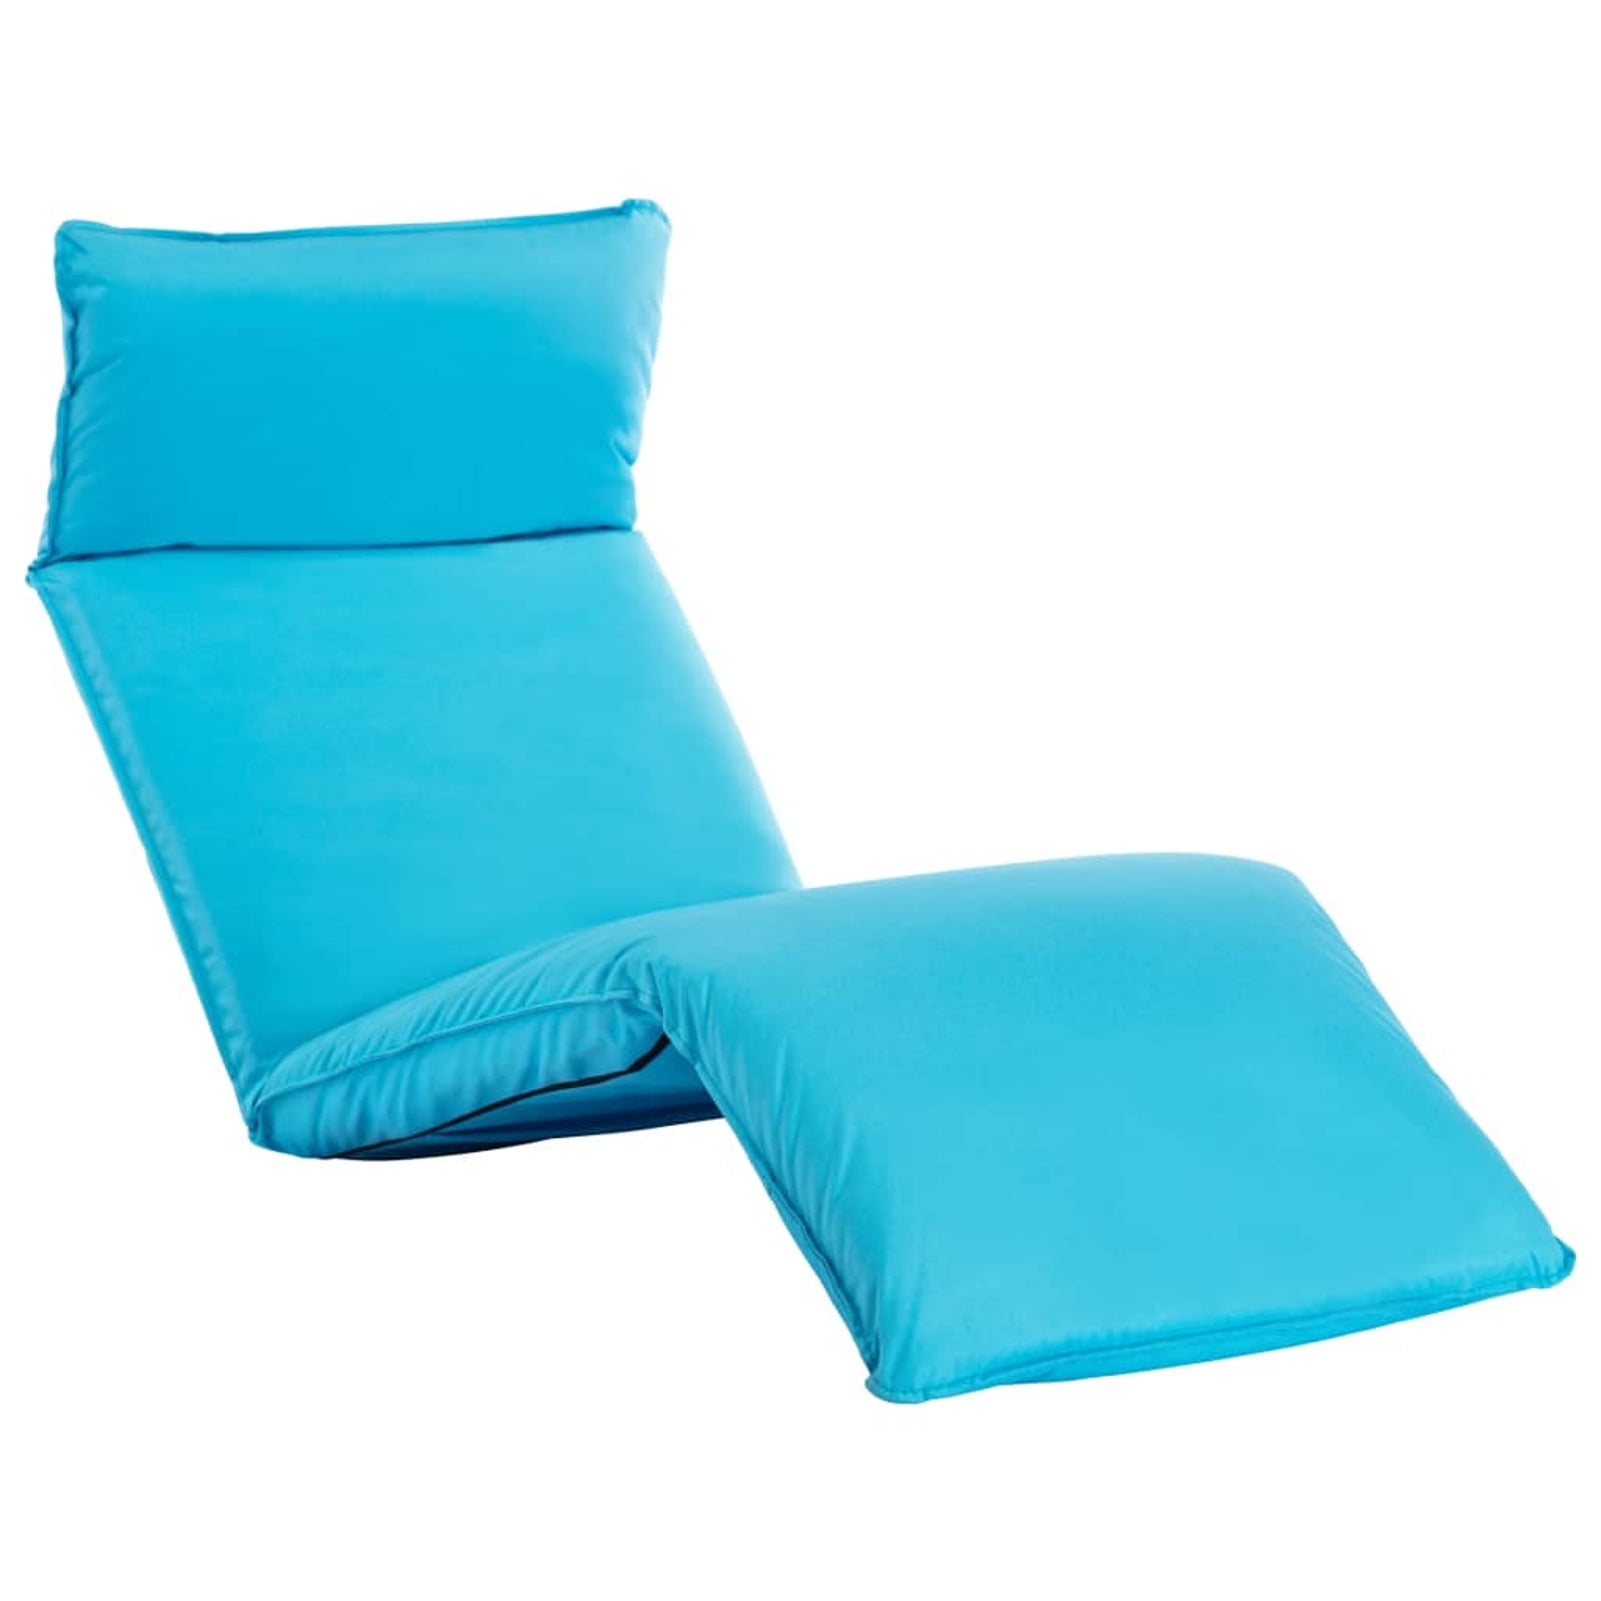 Basics Day Chaise Lounge Cover 